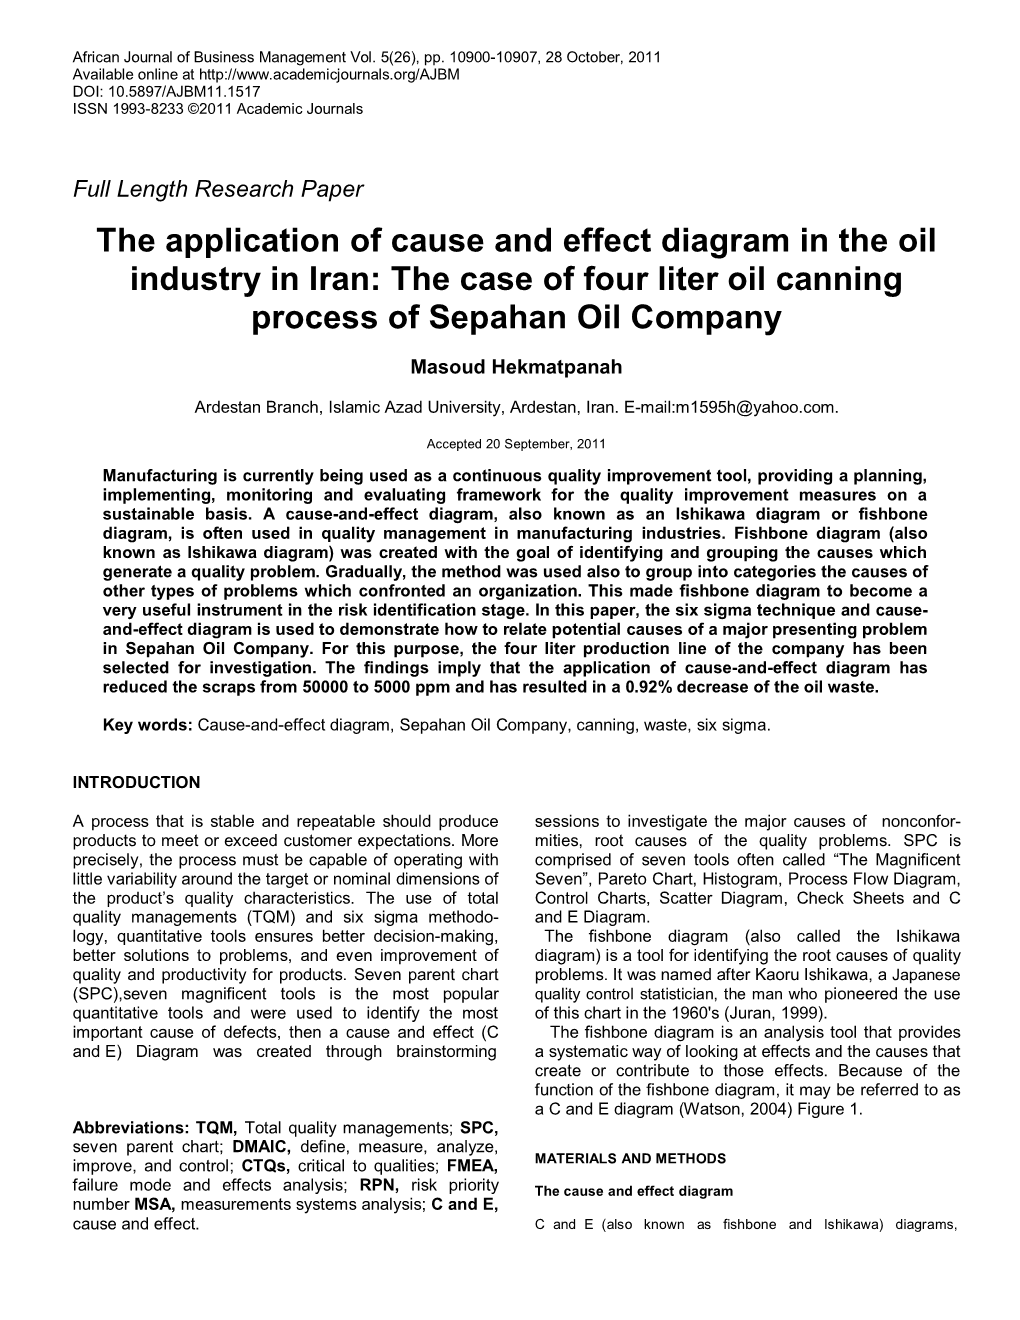 The Application of Cause and Effect Diagram in the Oil Industry in Iran: the Case of Four Liter Oil Canning Process of Sepahan Oil Company